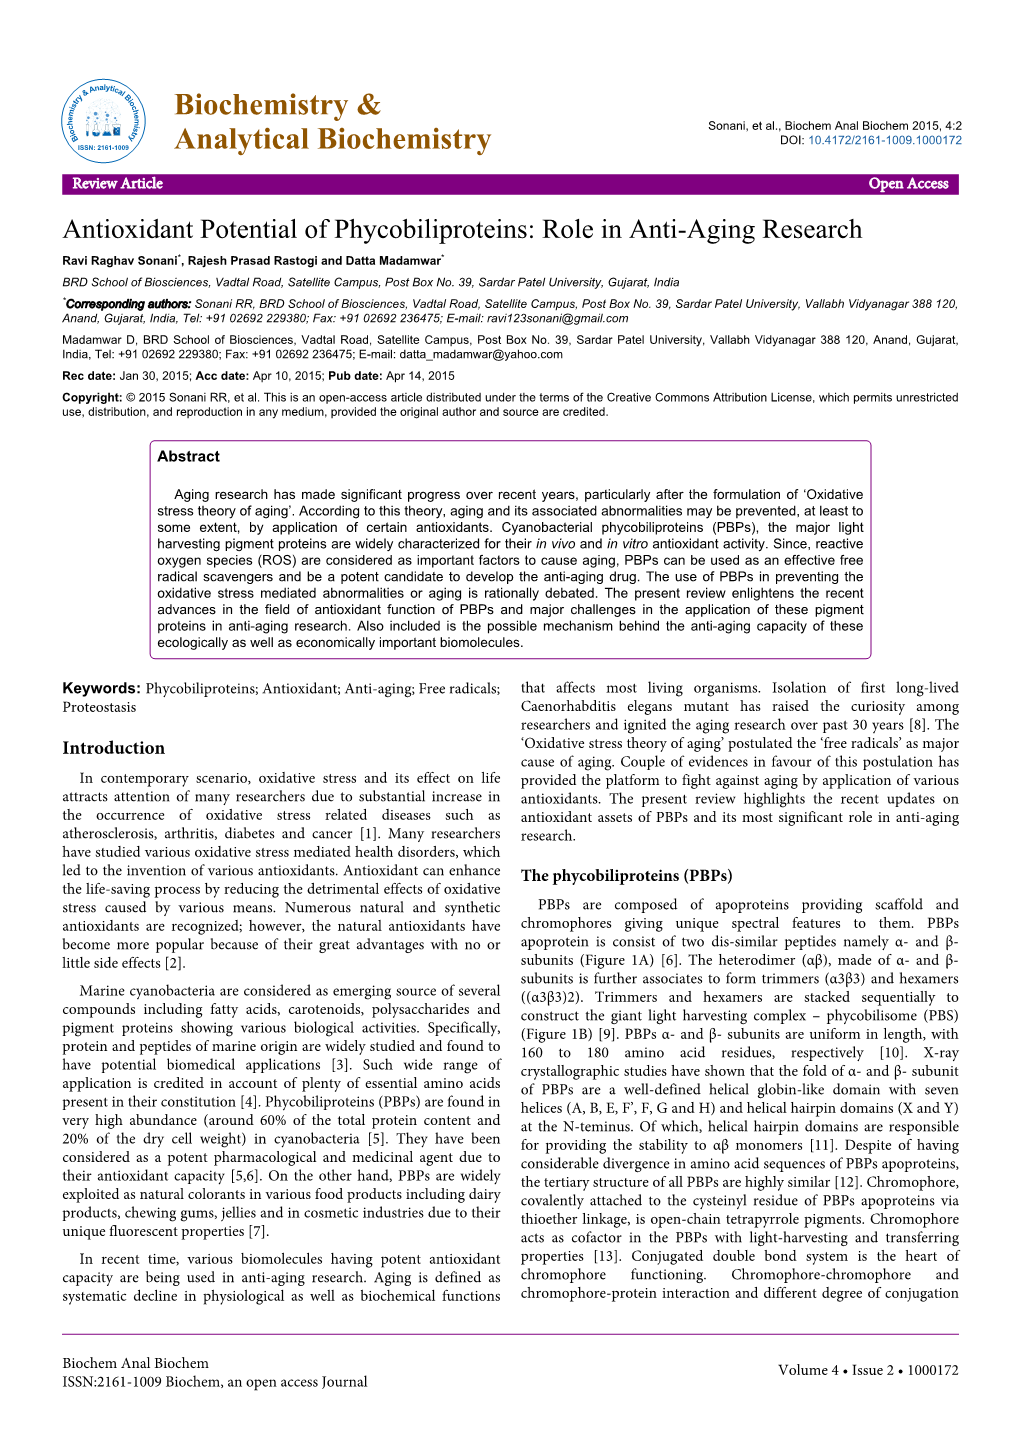 Antioxidant Potential of Phycobiliproteins: Role in Anti-Aging Research